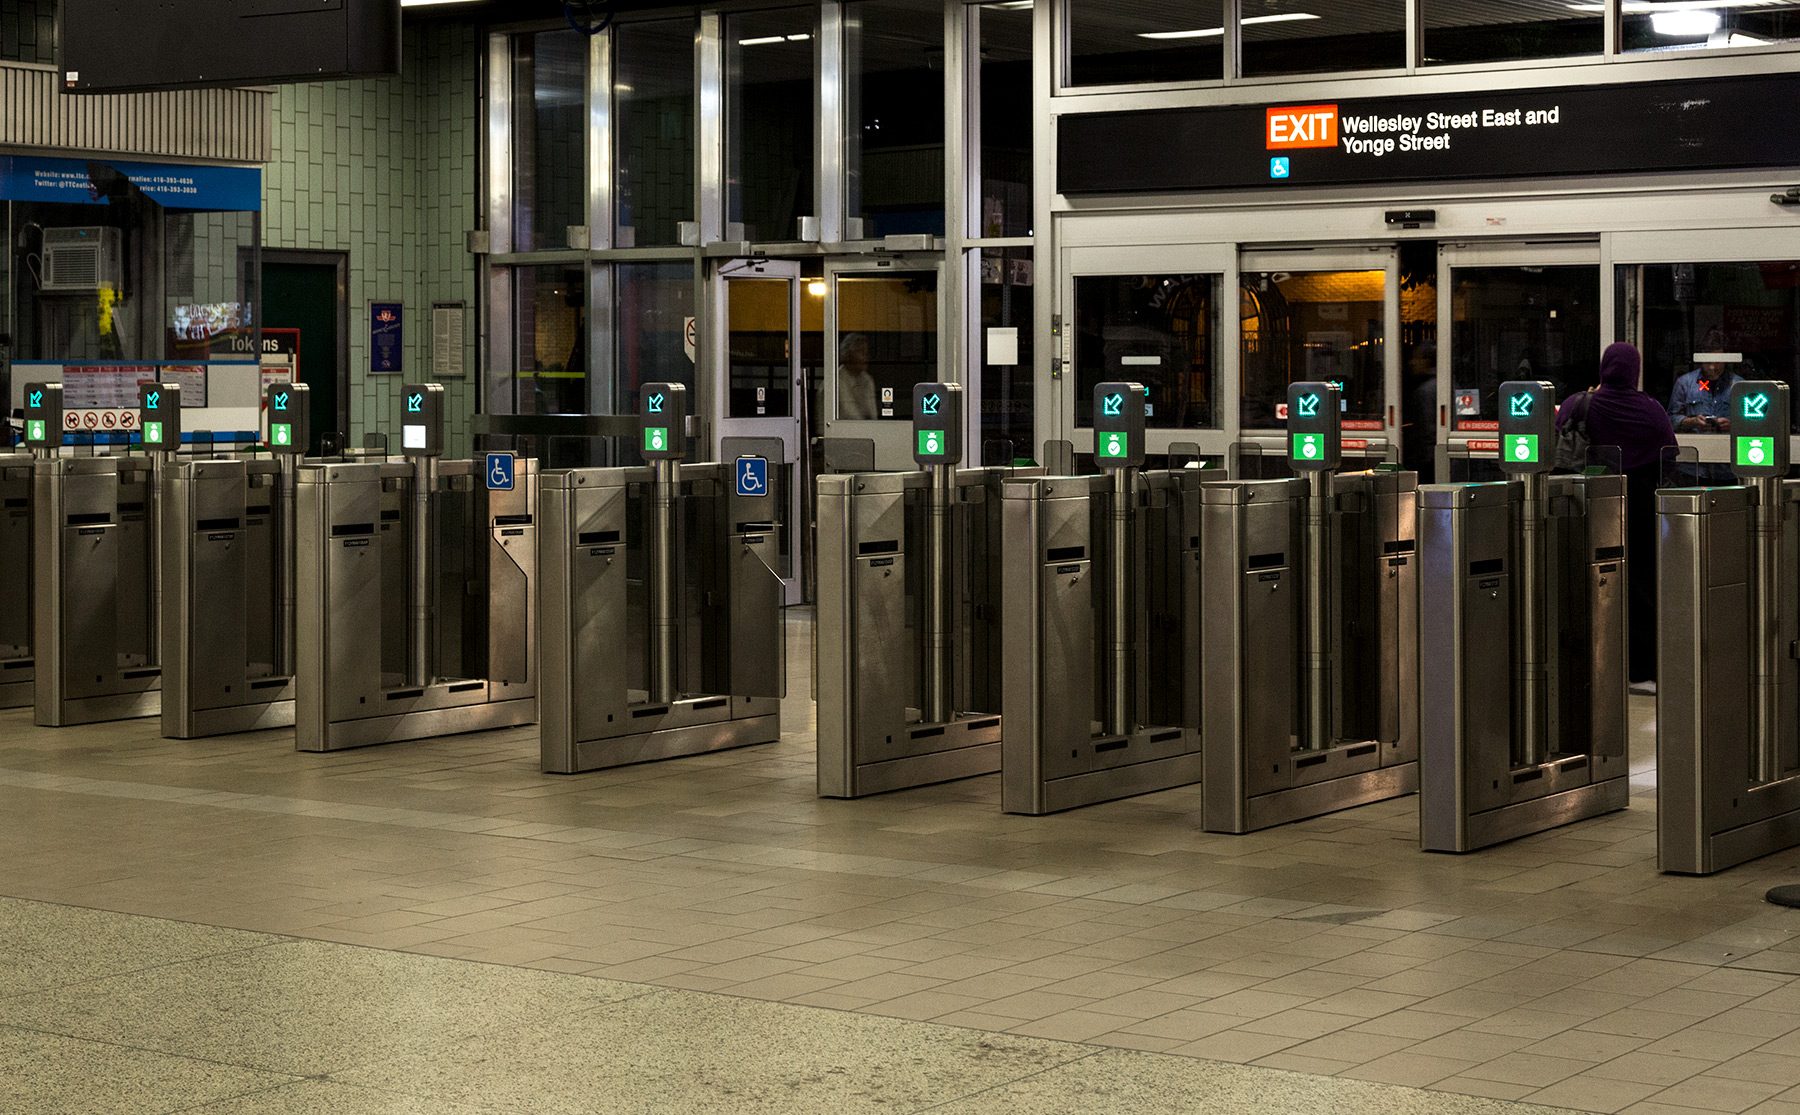 20160609. Presto fare gates have replaced the old turnstiles at